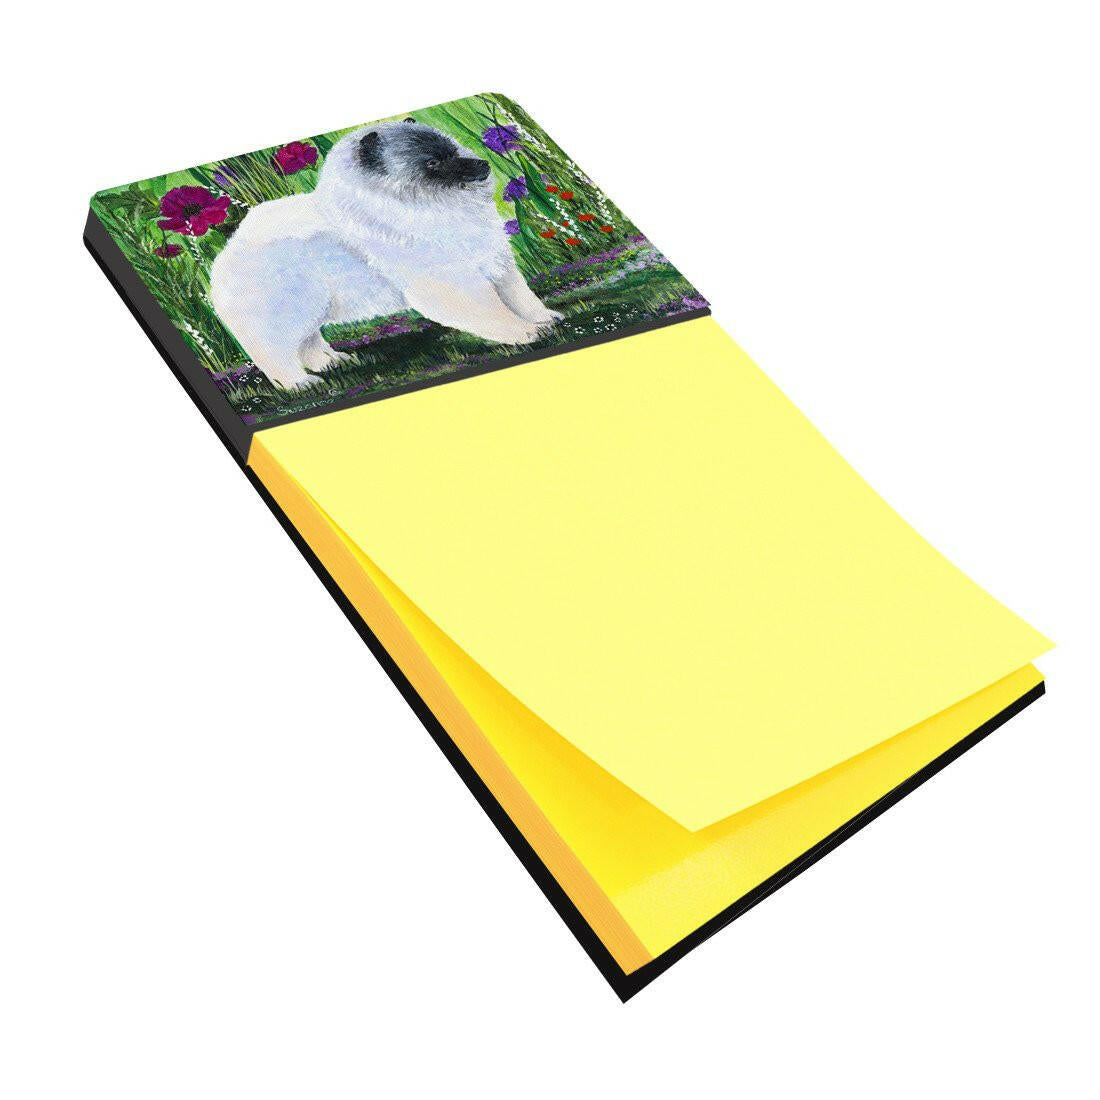 Keeshond Refiillable Sticky Note Holder or Postit Note Dispenser SS8424SN by Caroline's Treasures